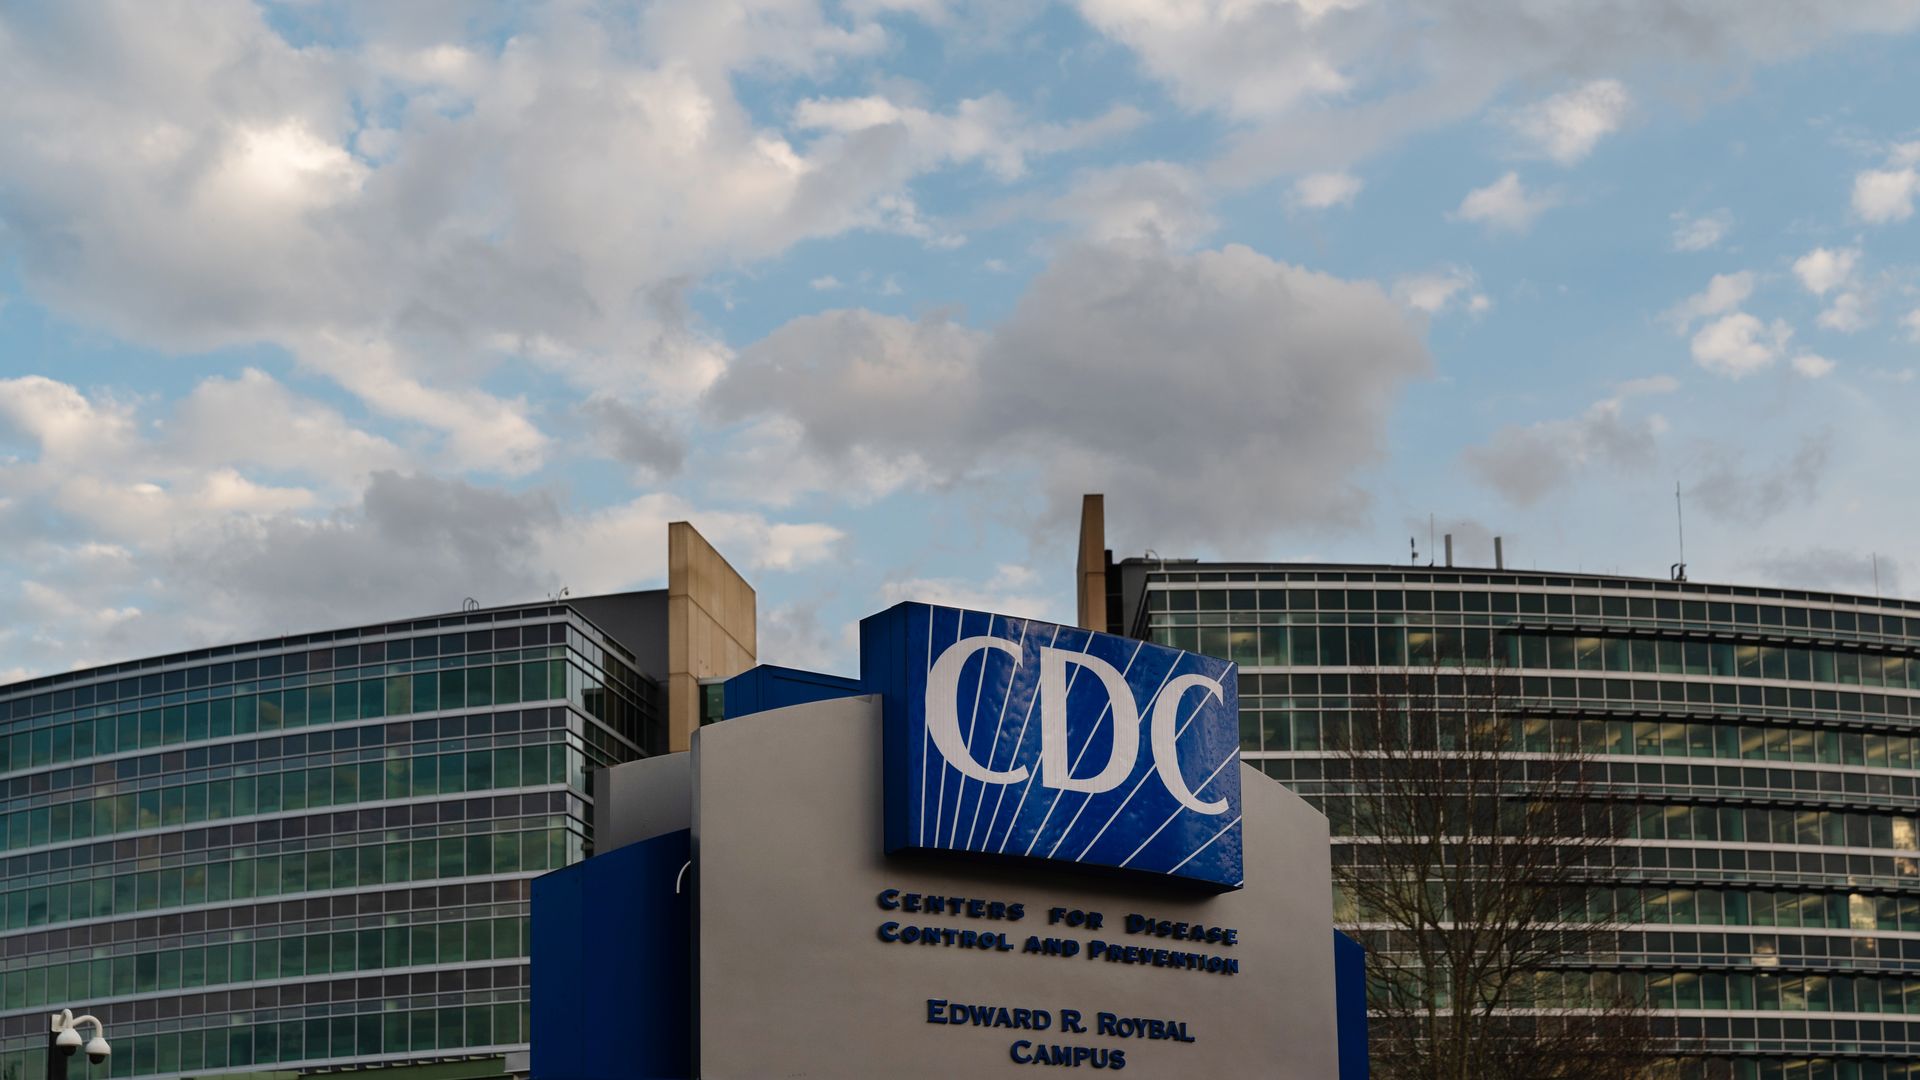 The Centers for Disease Control and Prevention (CDC) headquarters stands in Atlanta, Georgia.